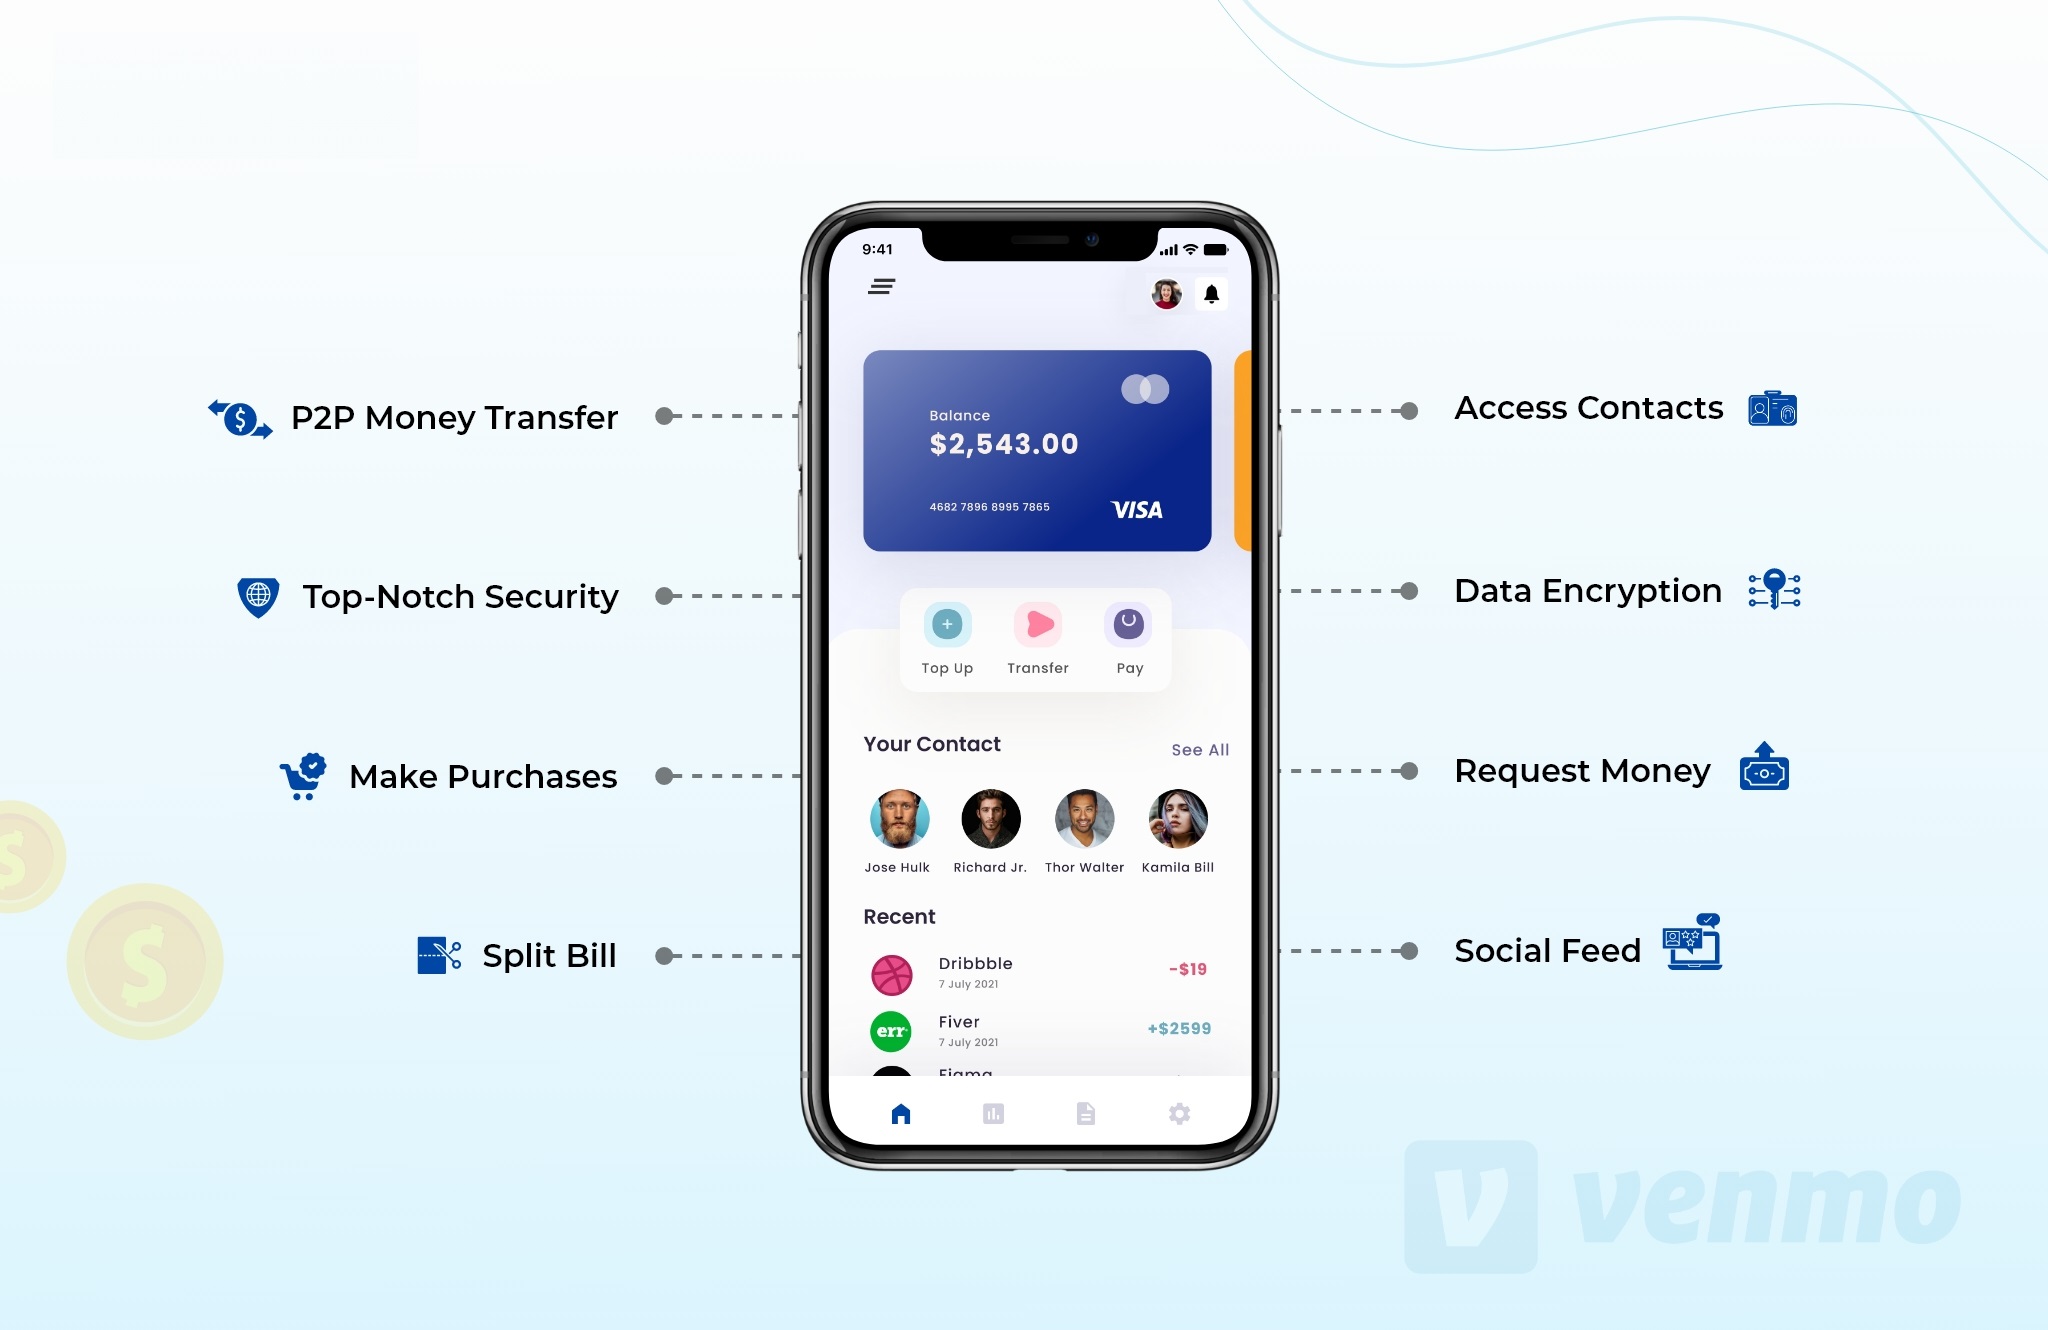 Features of Payment Apps Like Venmo